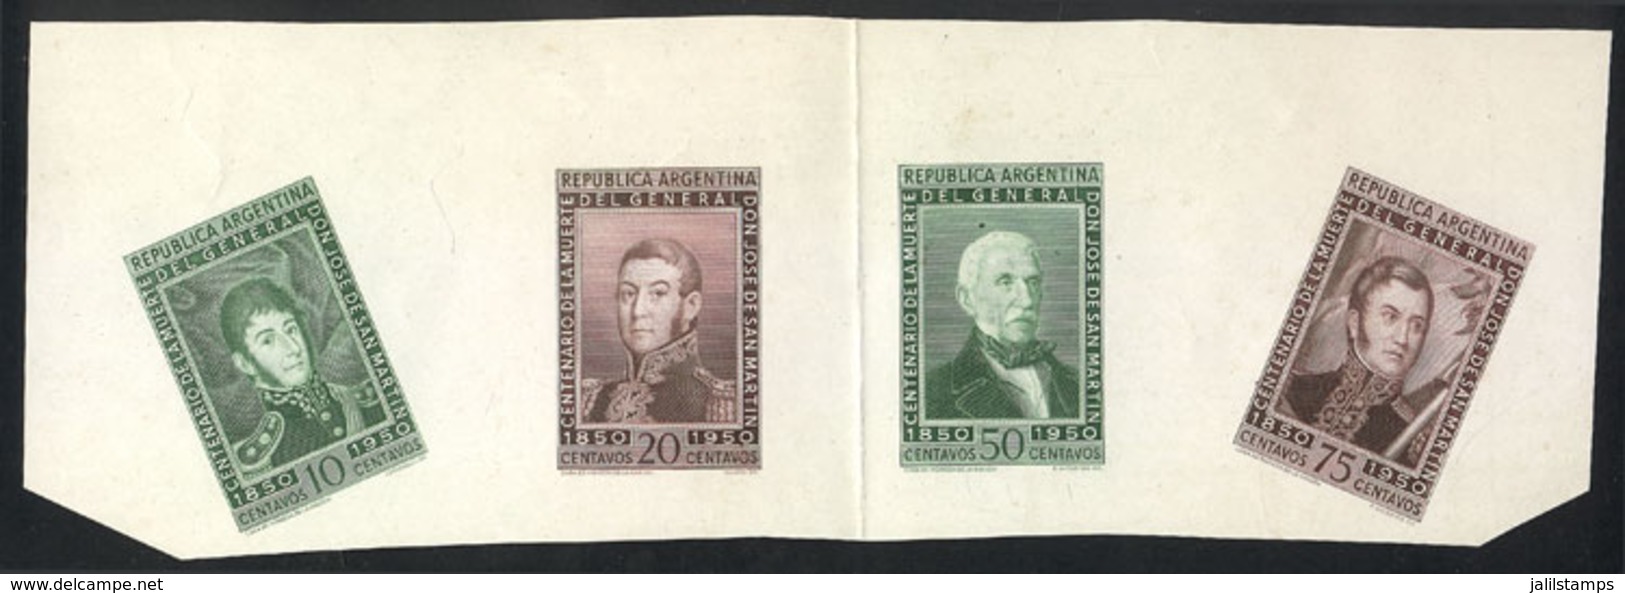 ARGENTINA: GJ.976 + 977 + 979 + 980, 1950 San Martín, MULTIPLE DIE PROOF Of The Engraved Values, Unadopted Colors, Print - Usados